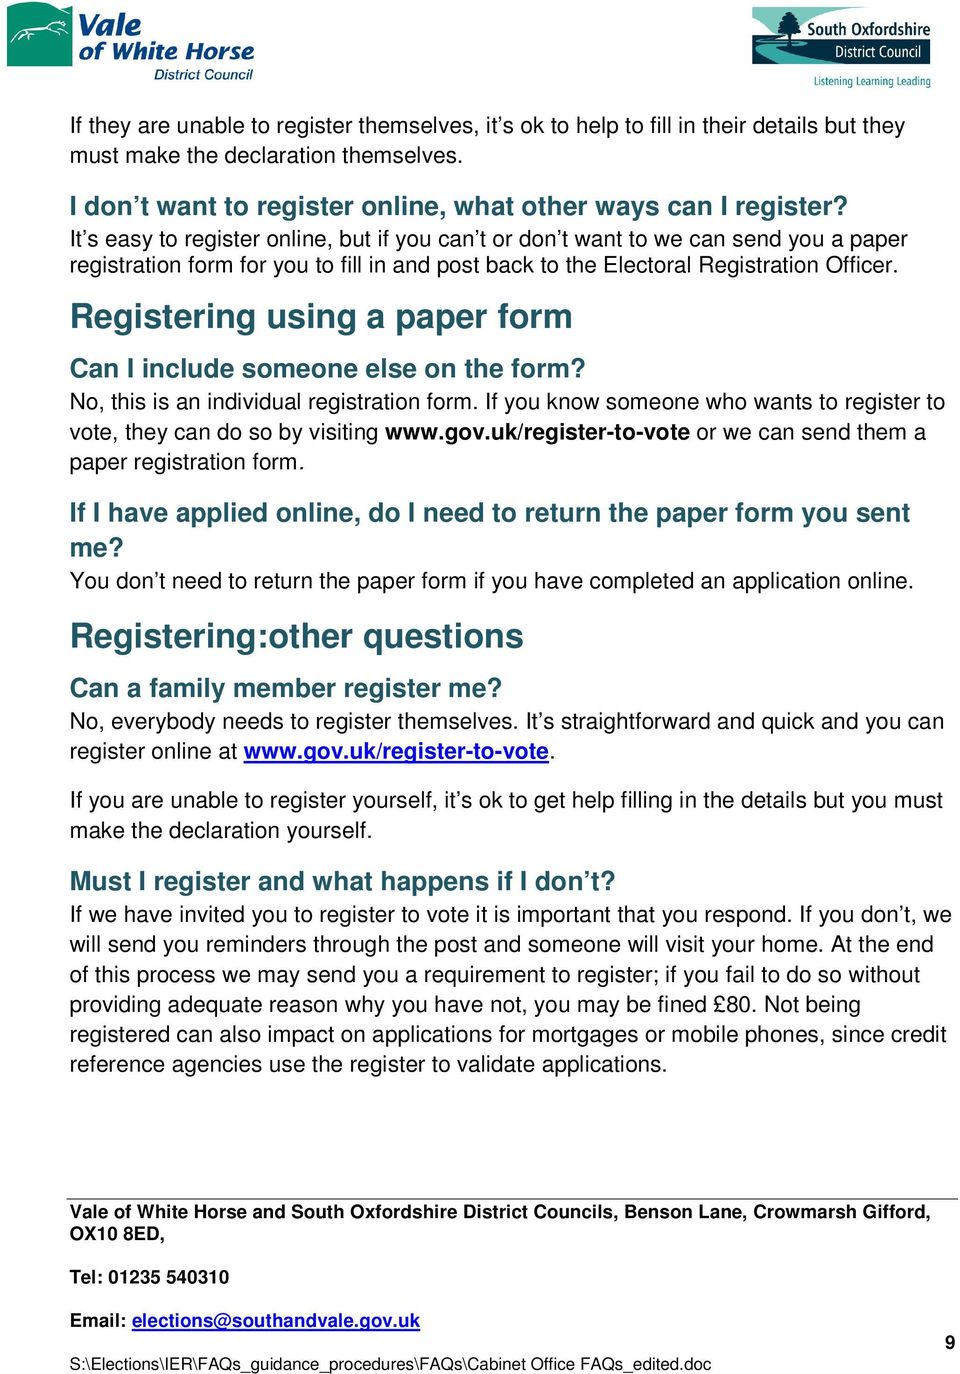 Registering using a paper form Can I include someone else on the form? No, this is an individual registration form. If you know someone who wants to register to vote, they can do so by visiting www.